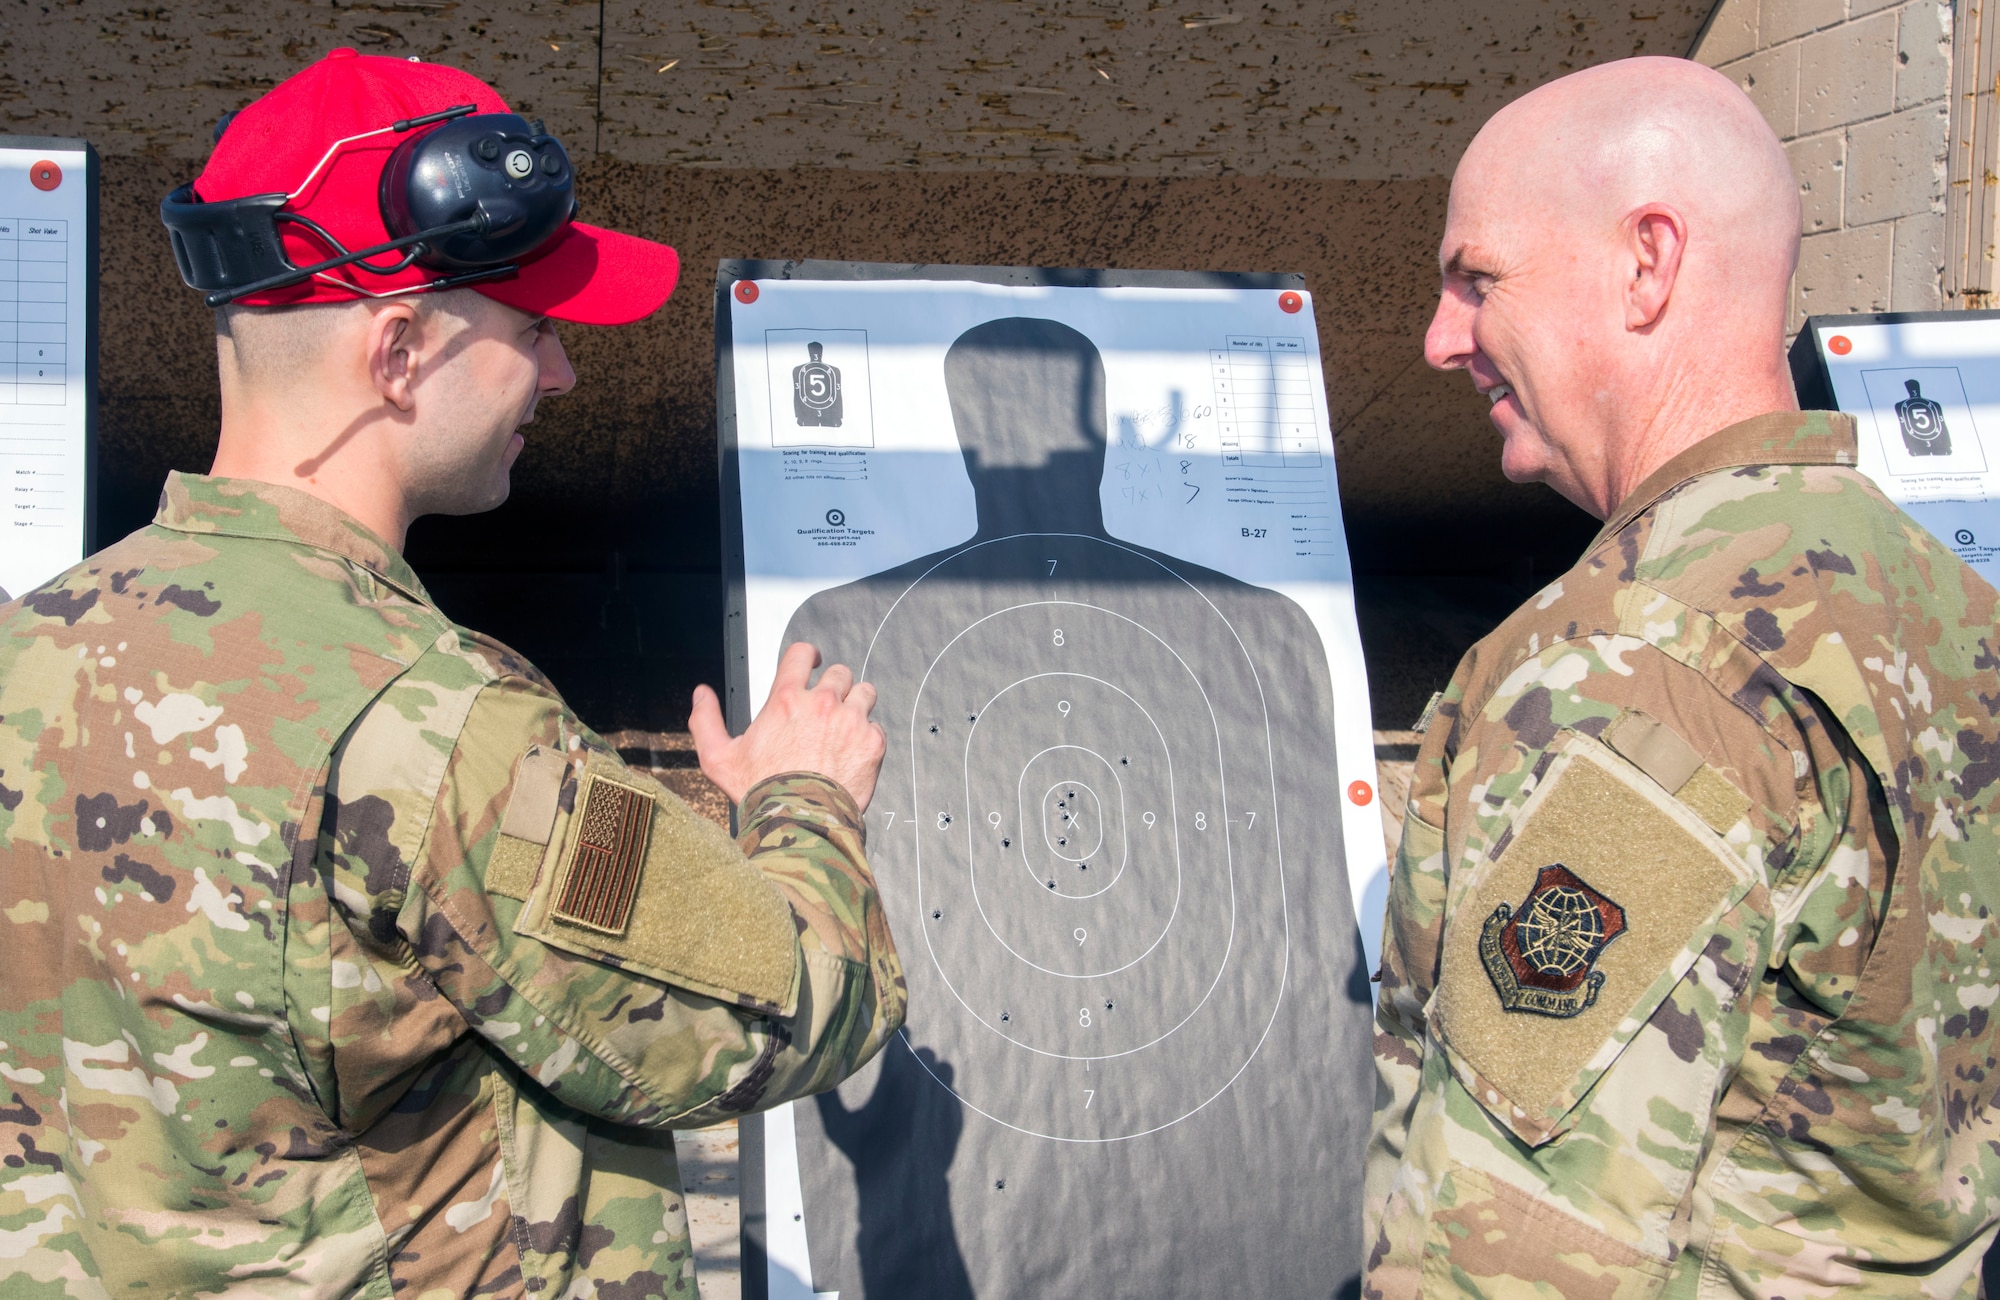 U.S. Air Force (USAF) Maj. Gen. Sam Barrett, the 18th Air Force commander from Scott Air Force Base, Ill., talks about M-9 pistol qualification with USAF Staff Sgt. Dalhian Guest, a 6th Security Forces Squadron combat arms instructor, at MacDill AFB, Fla., May 9, 2019.